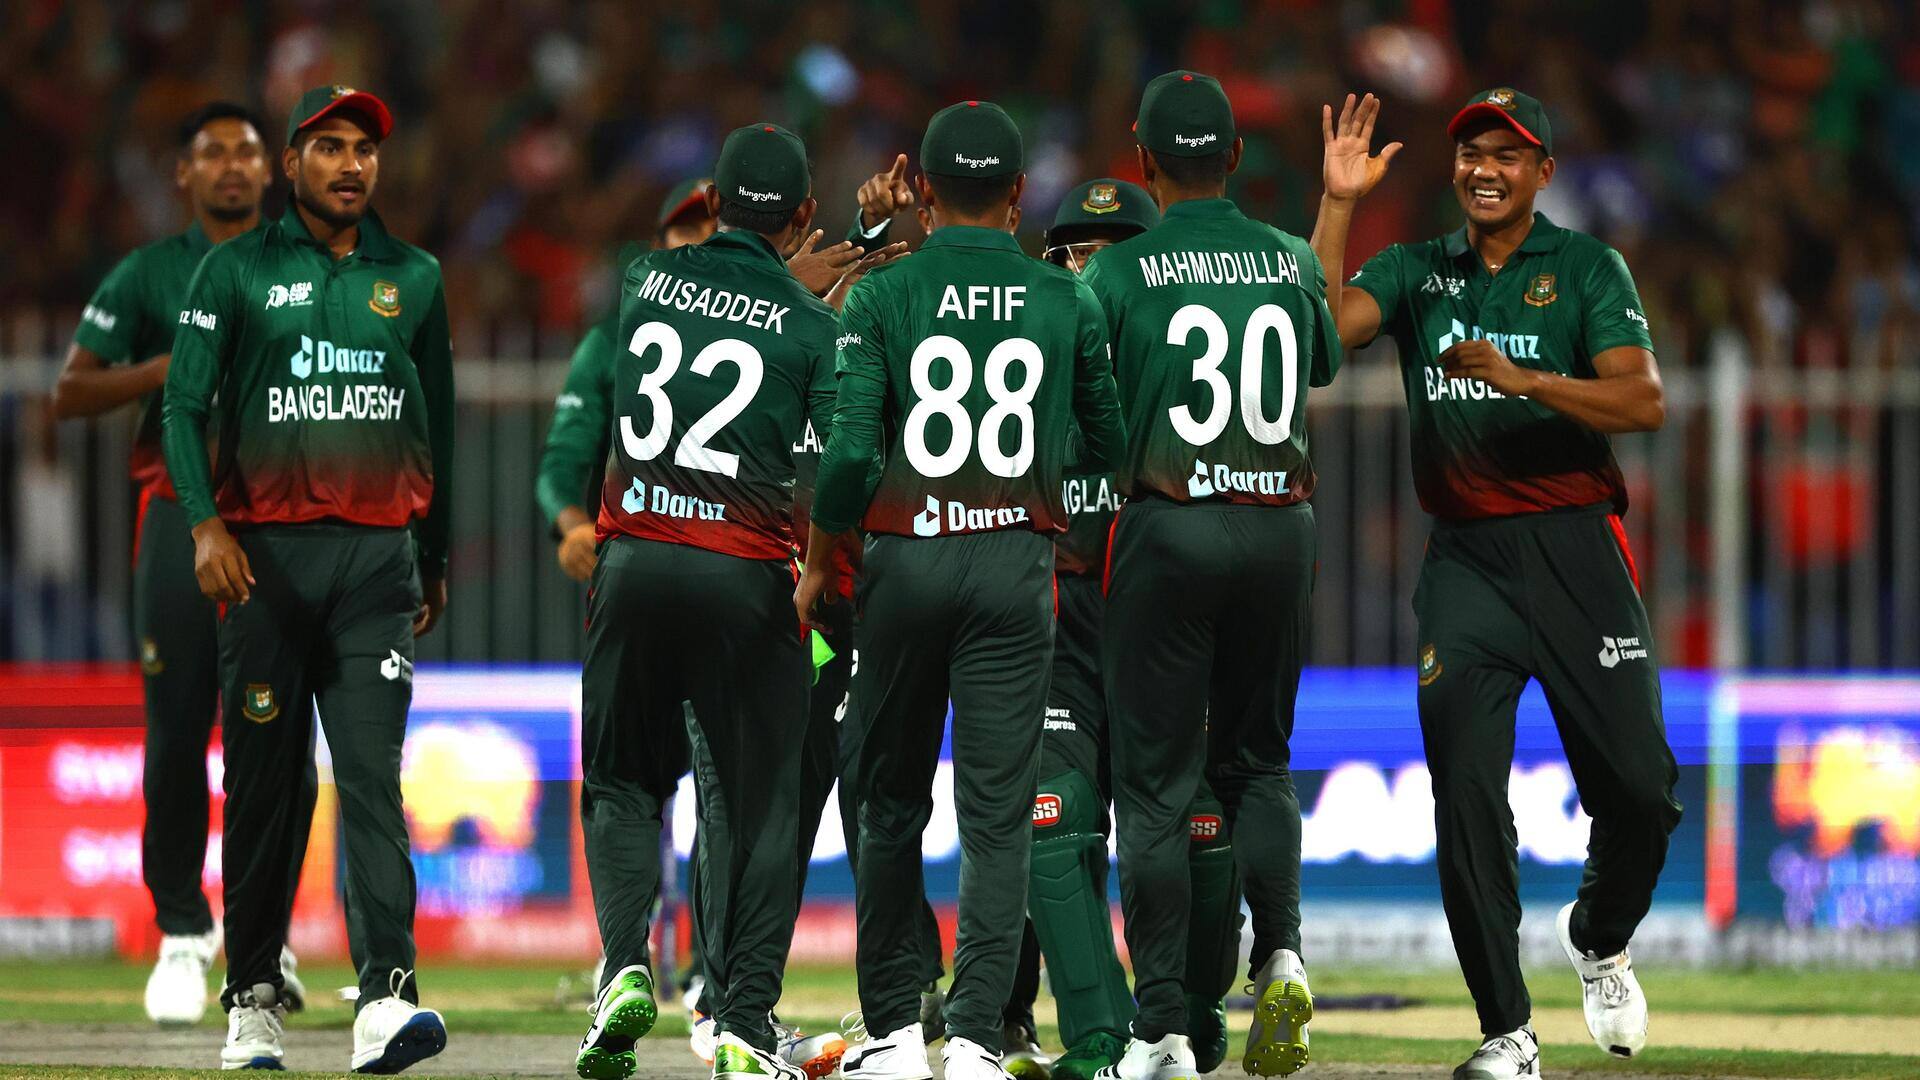 ICC Cricket World Cup: Bangladesh kick-start campaign against Afghanistan